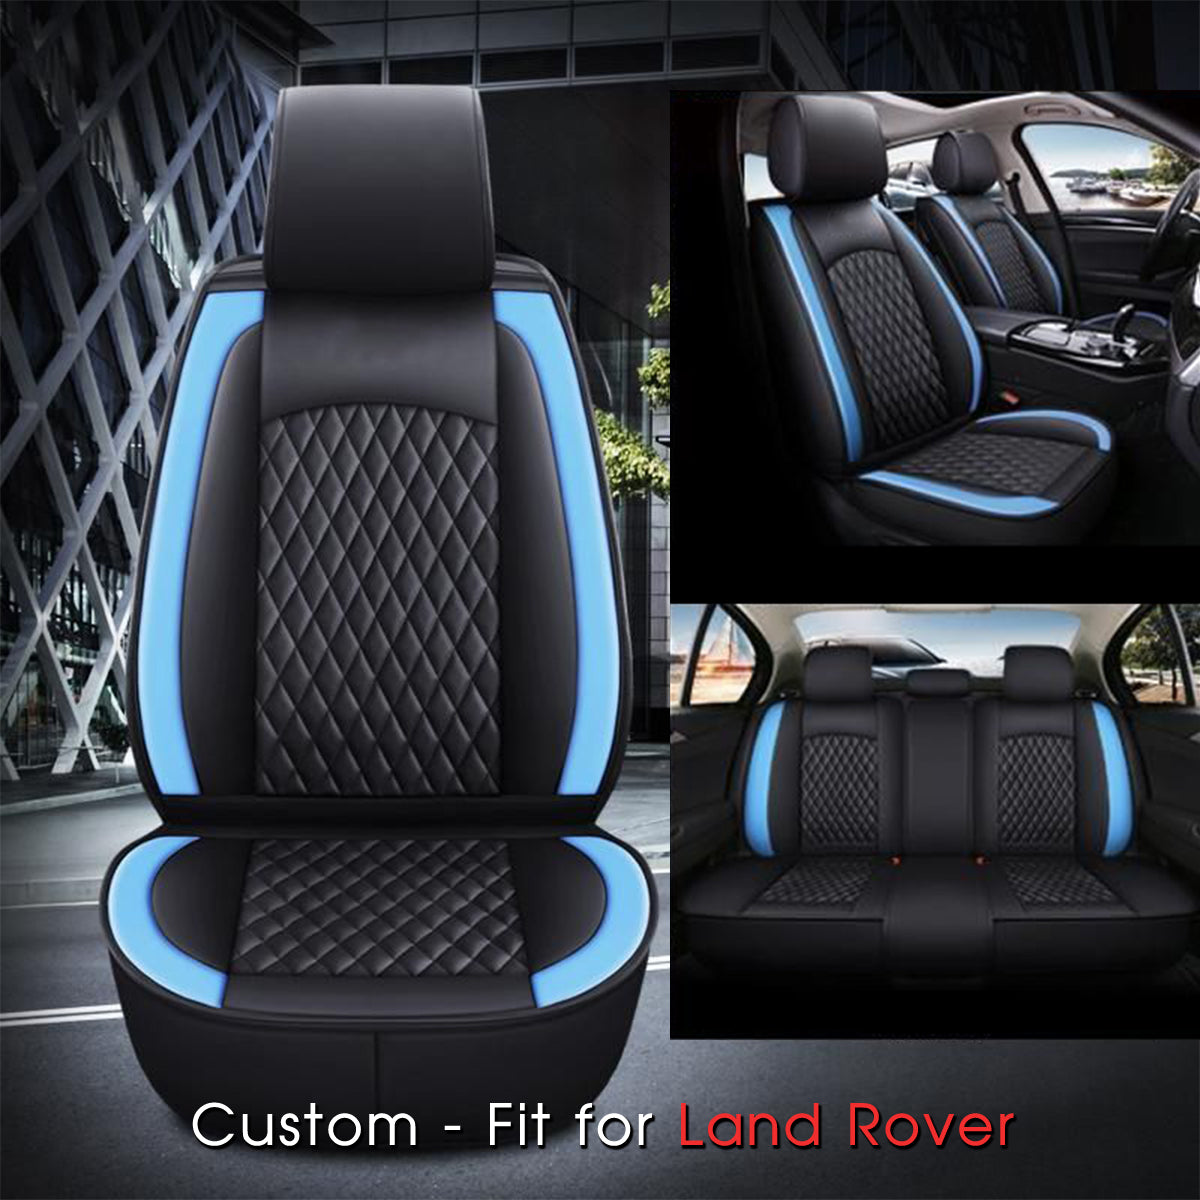 2 Car Seat Covers Full Set, Custom-Fit For Car, Waterproof Leather Front Rear Seat Automotive Protection Cushions, Car Accessories DLLR211